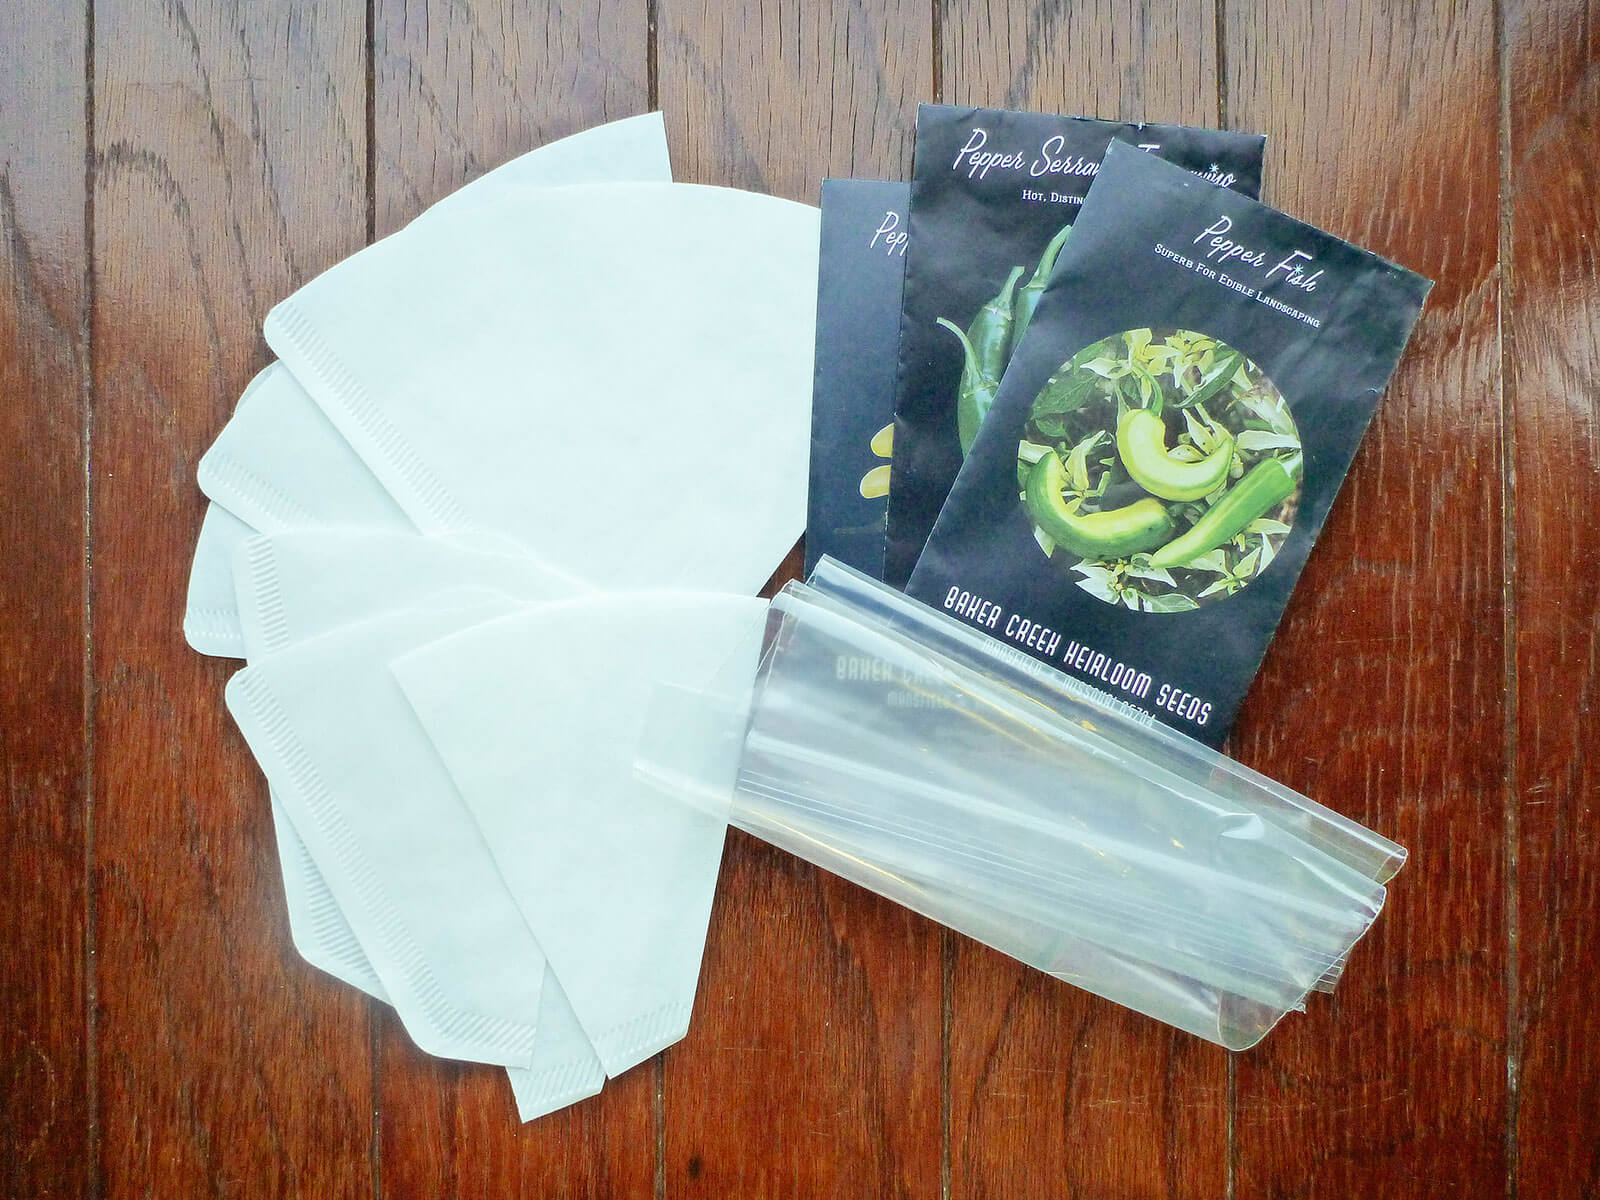 Gather your supplies for starting seeds in coffee filters